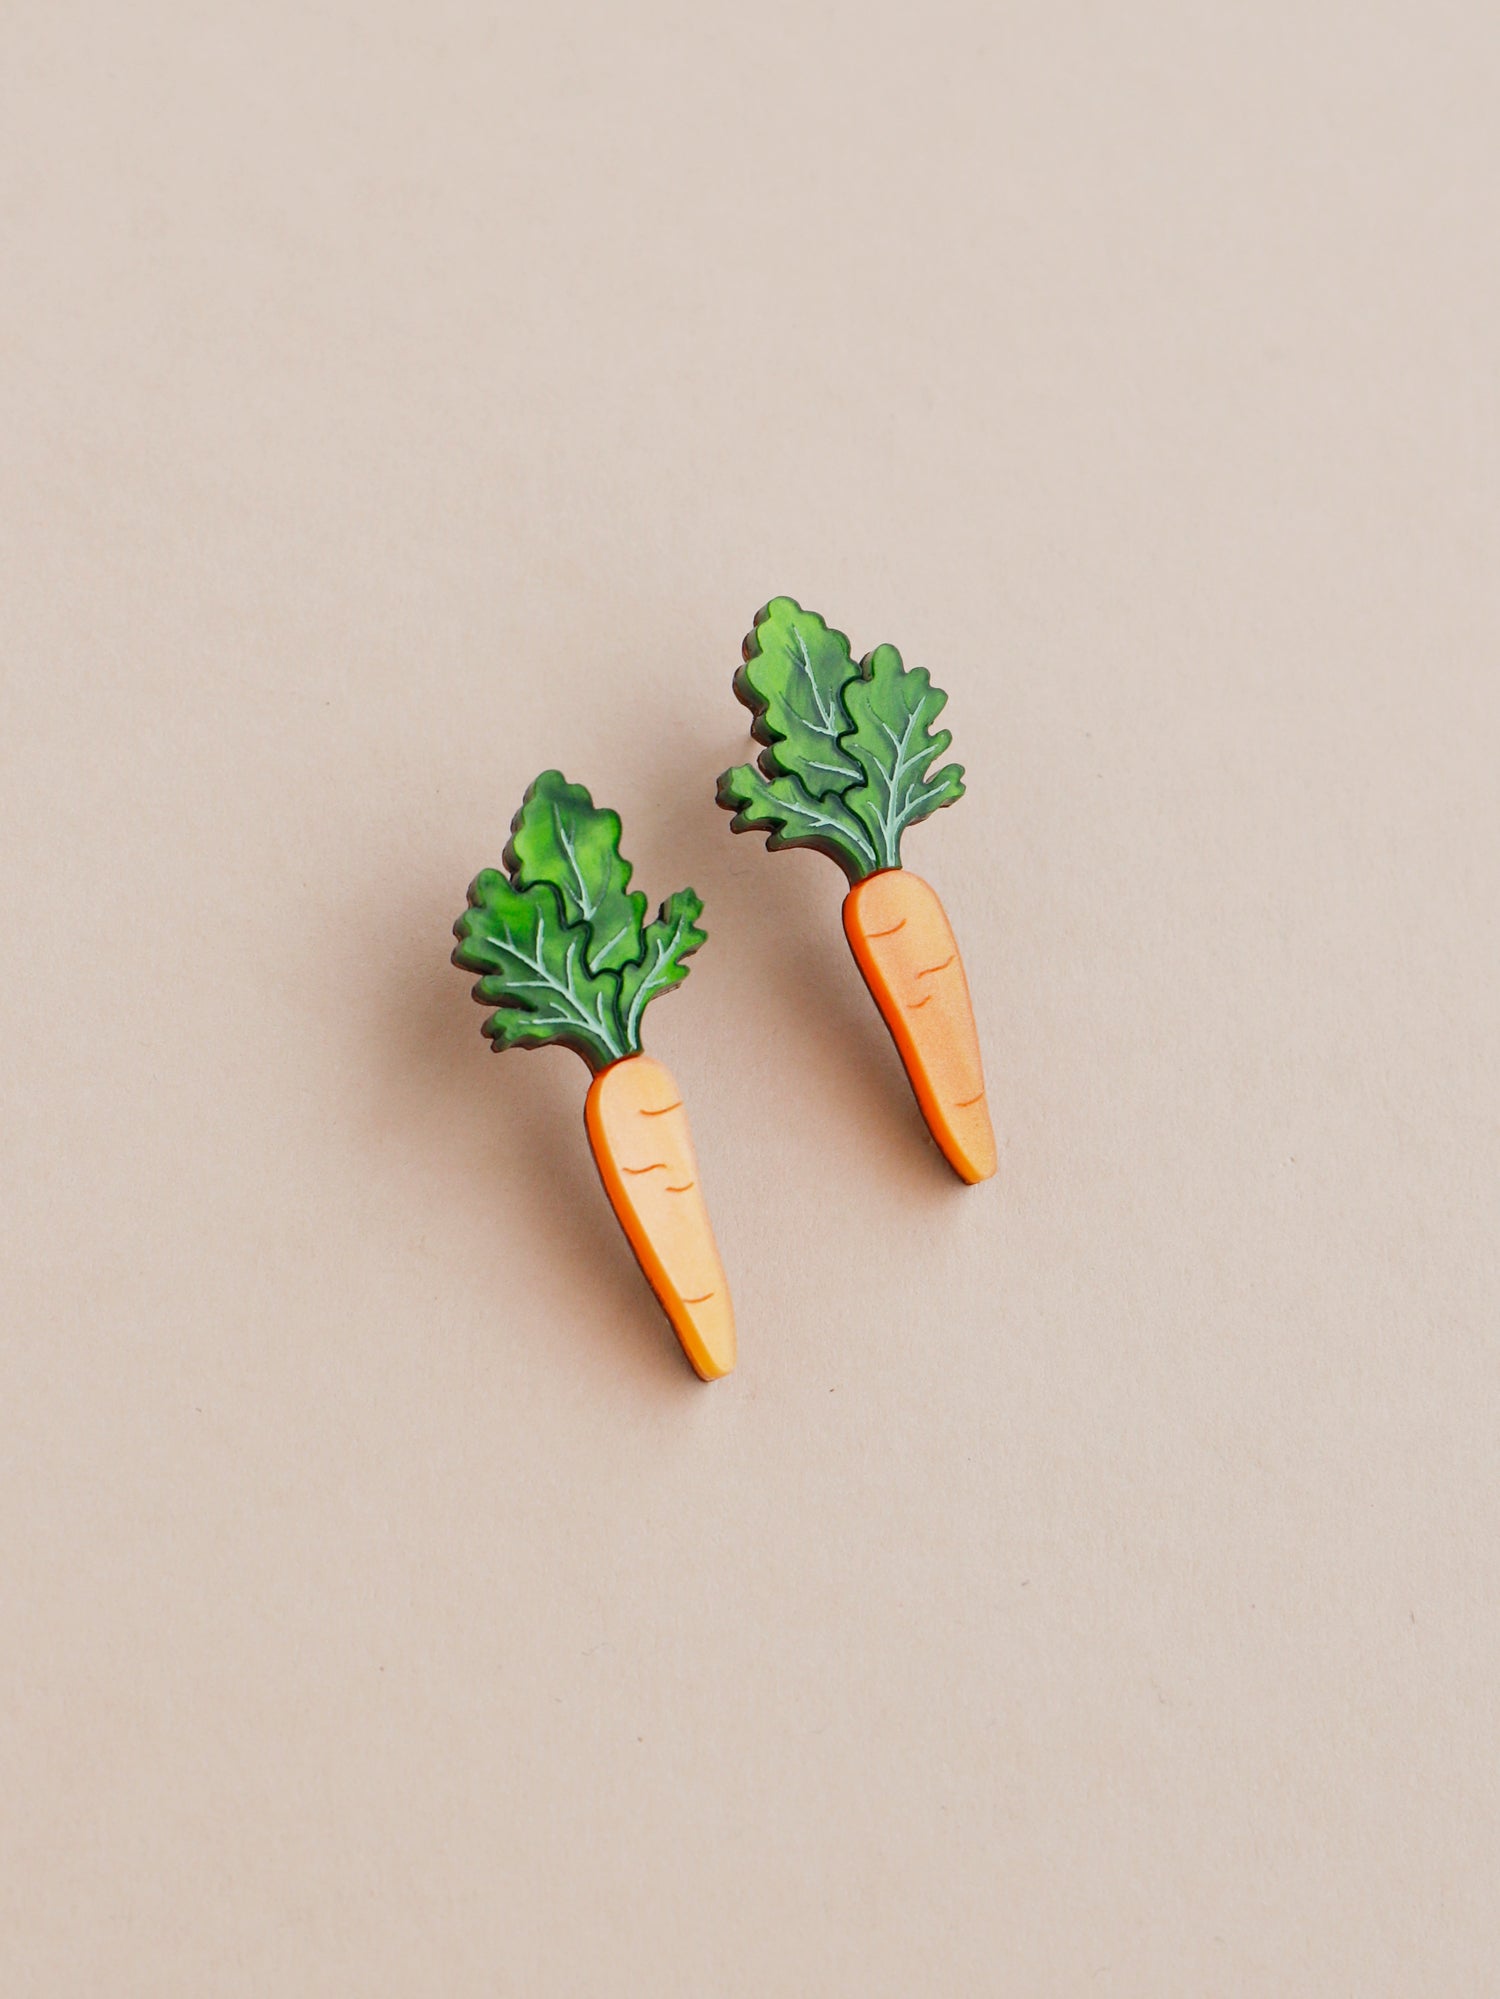 Orange and green carrot stud acrylic earrings with silver posts. Handmade in London by Wolf & Moon.